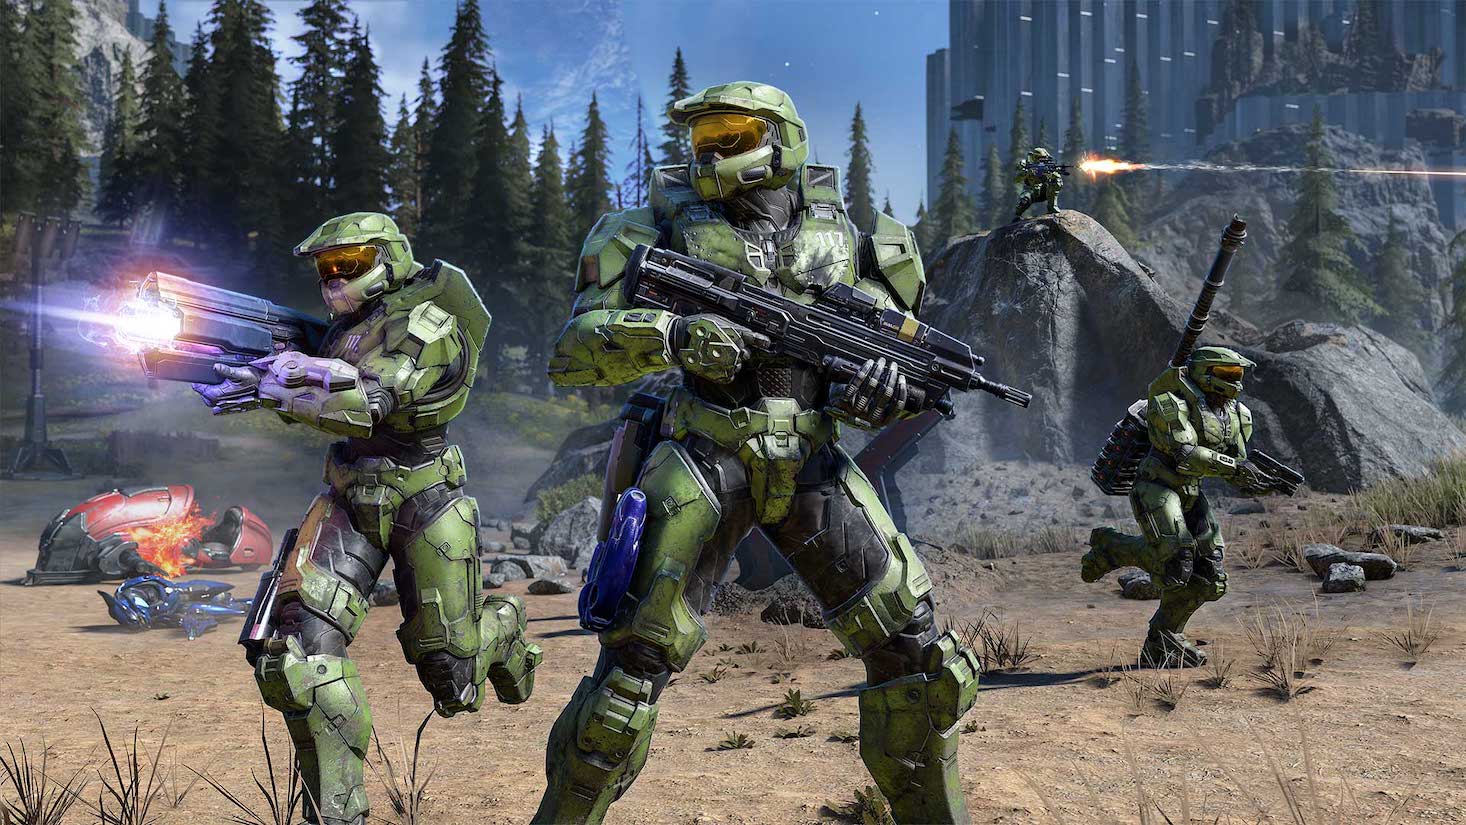 Four master chief are ready to fight in Halo Infinite